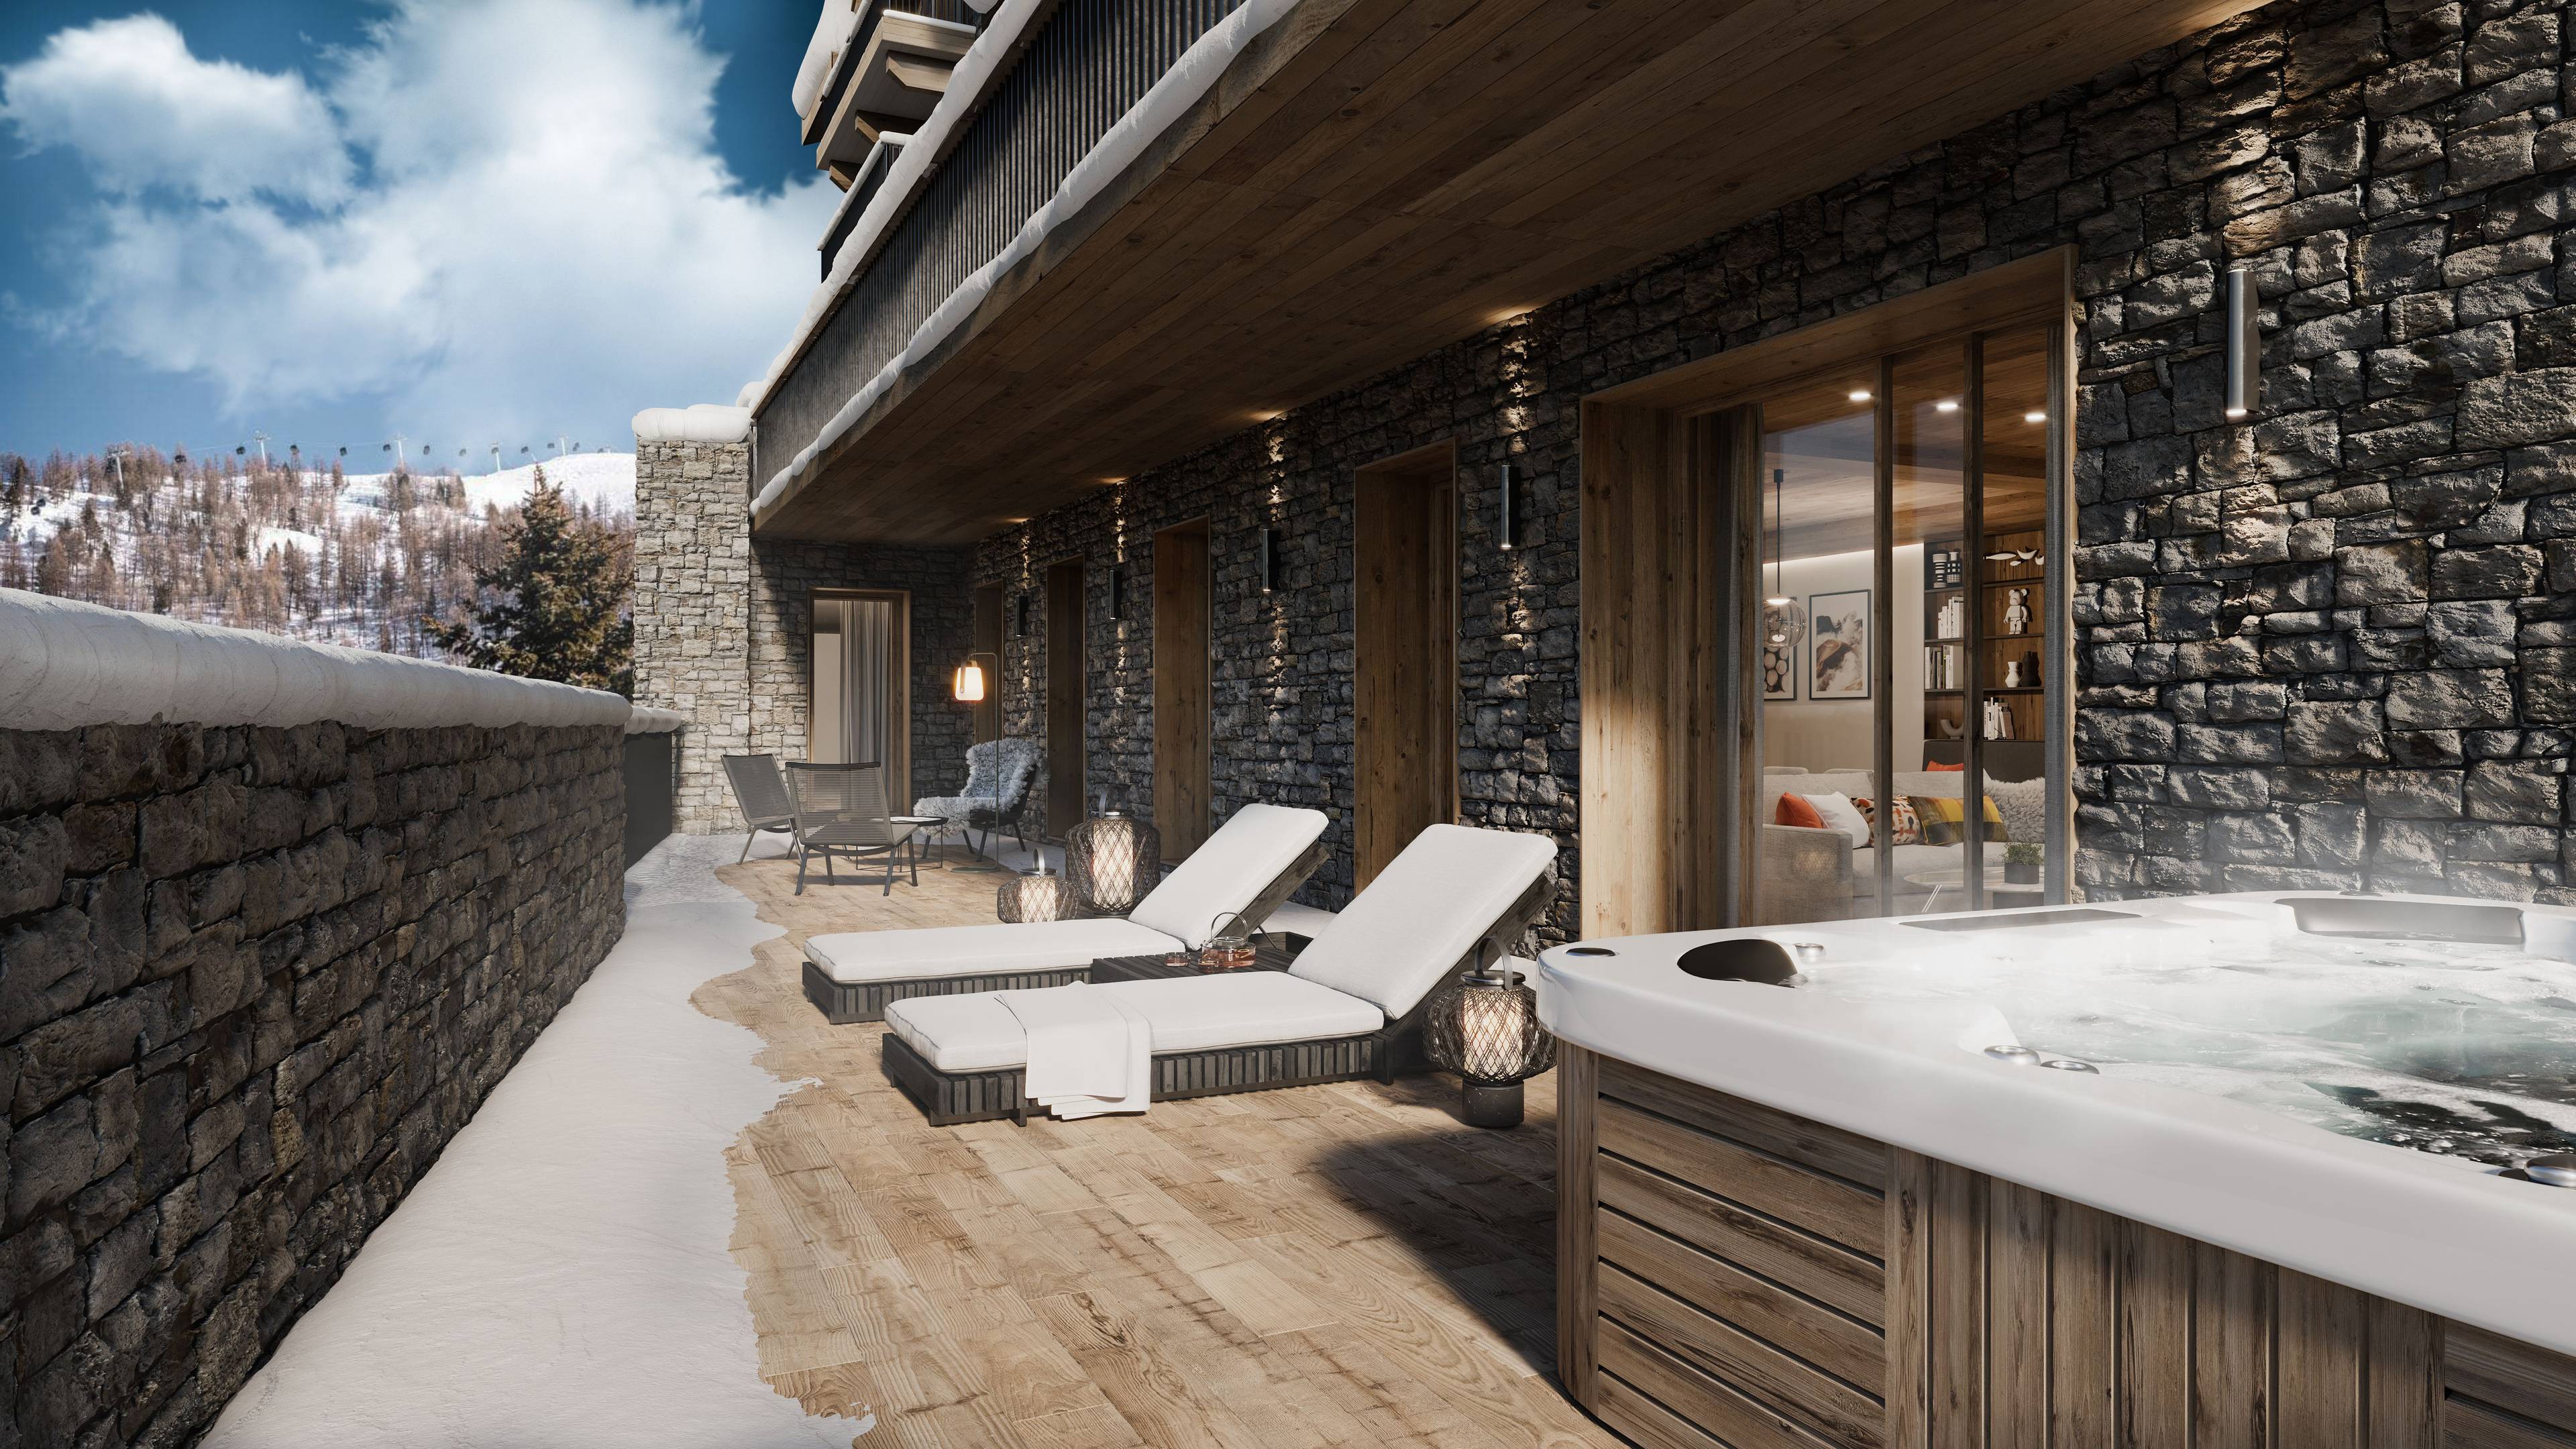 Swimming Pool, Spa, and Prime Ski Experience at Val D’Isère, France